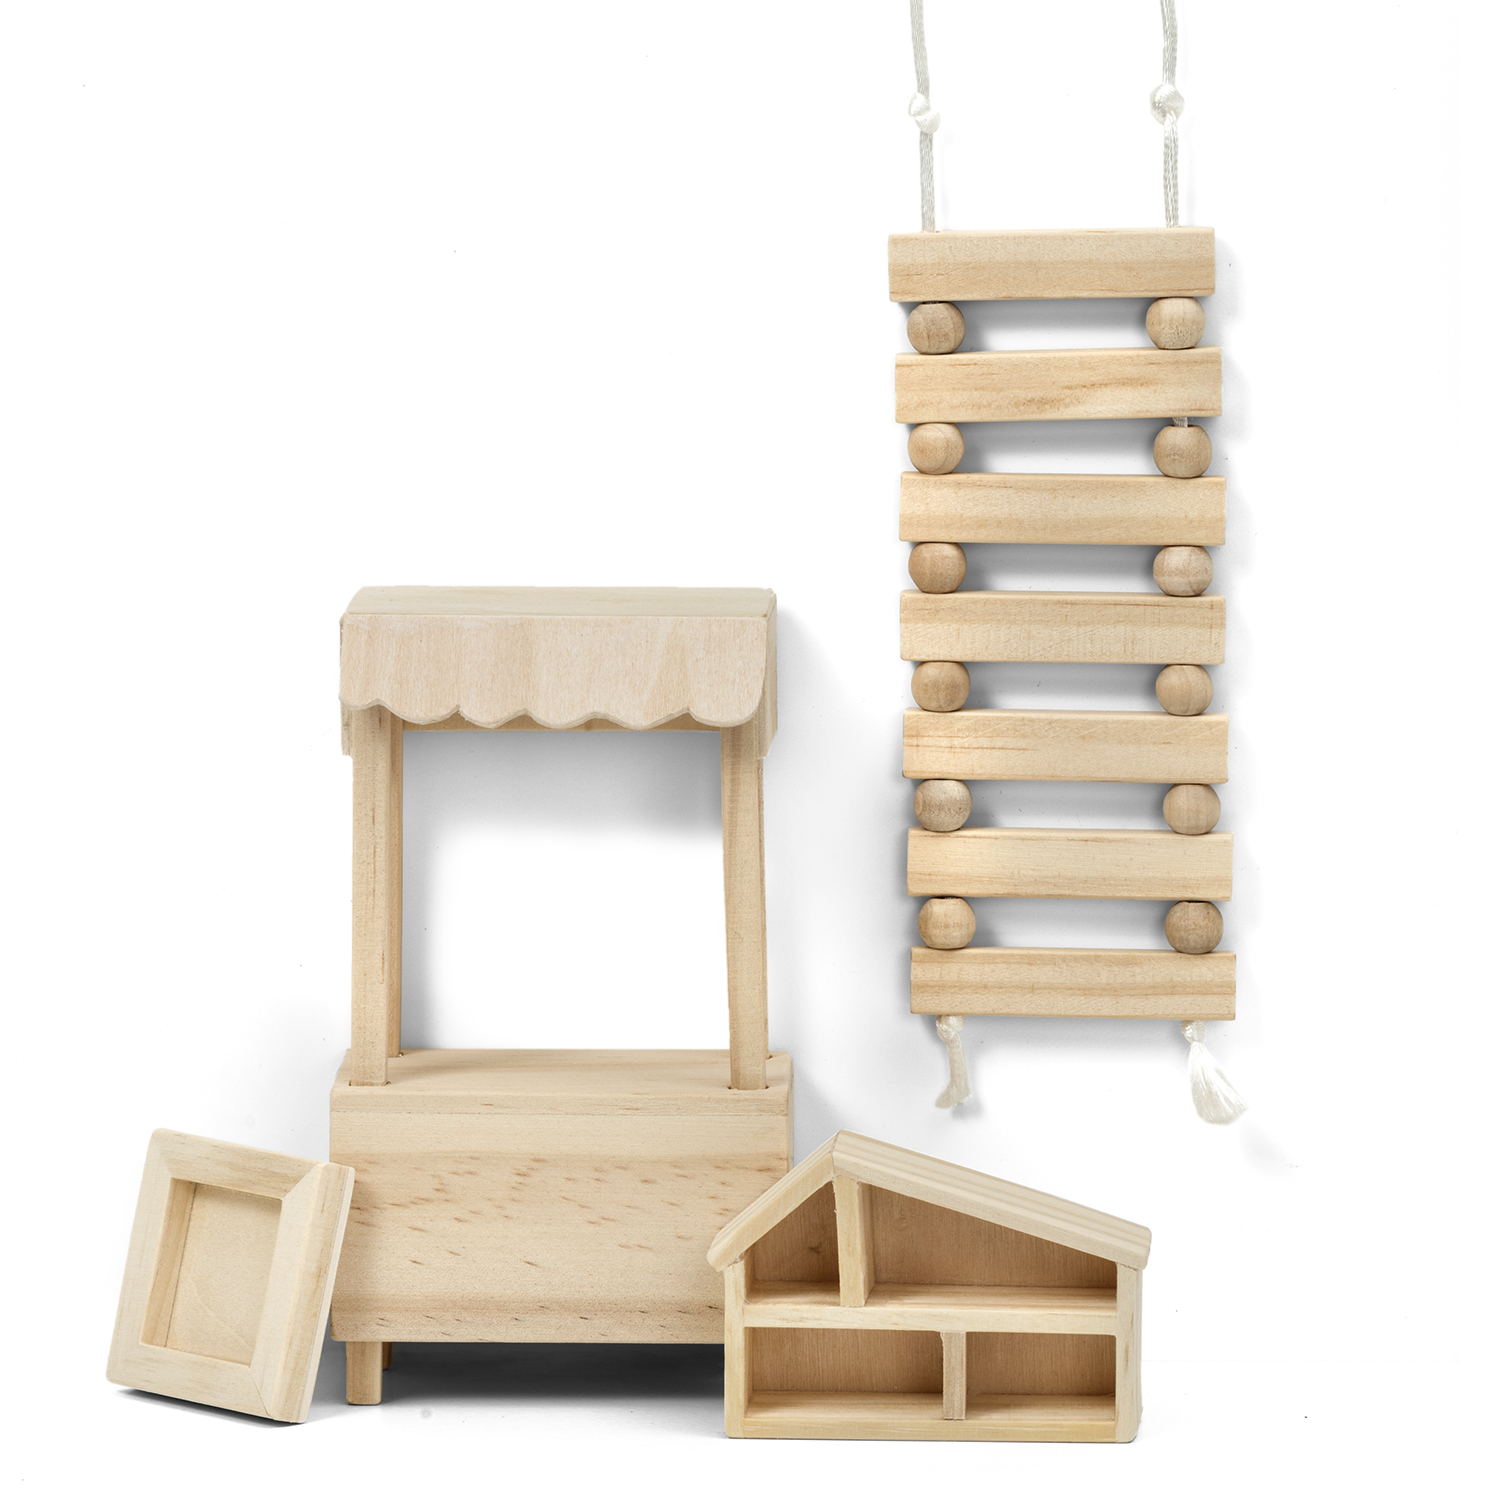 Doll house furniture & doll house accessories lundby dollhouse accessories play set natural wood